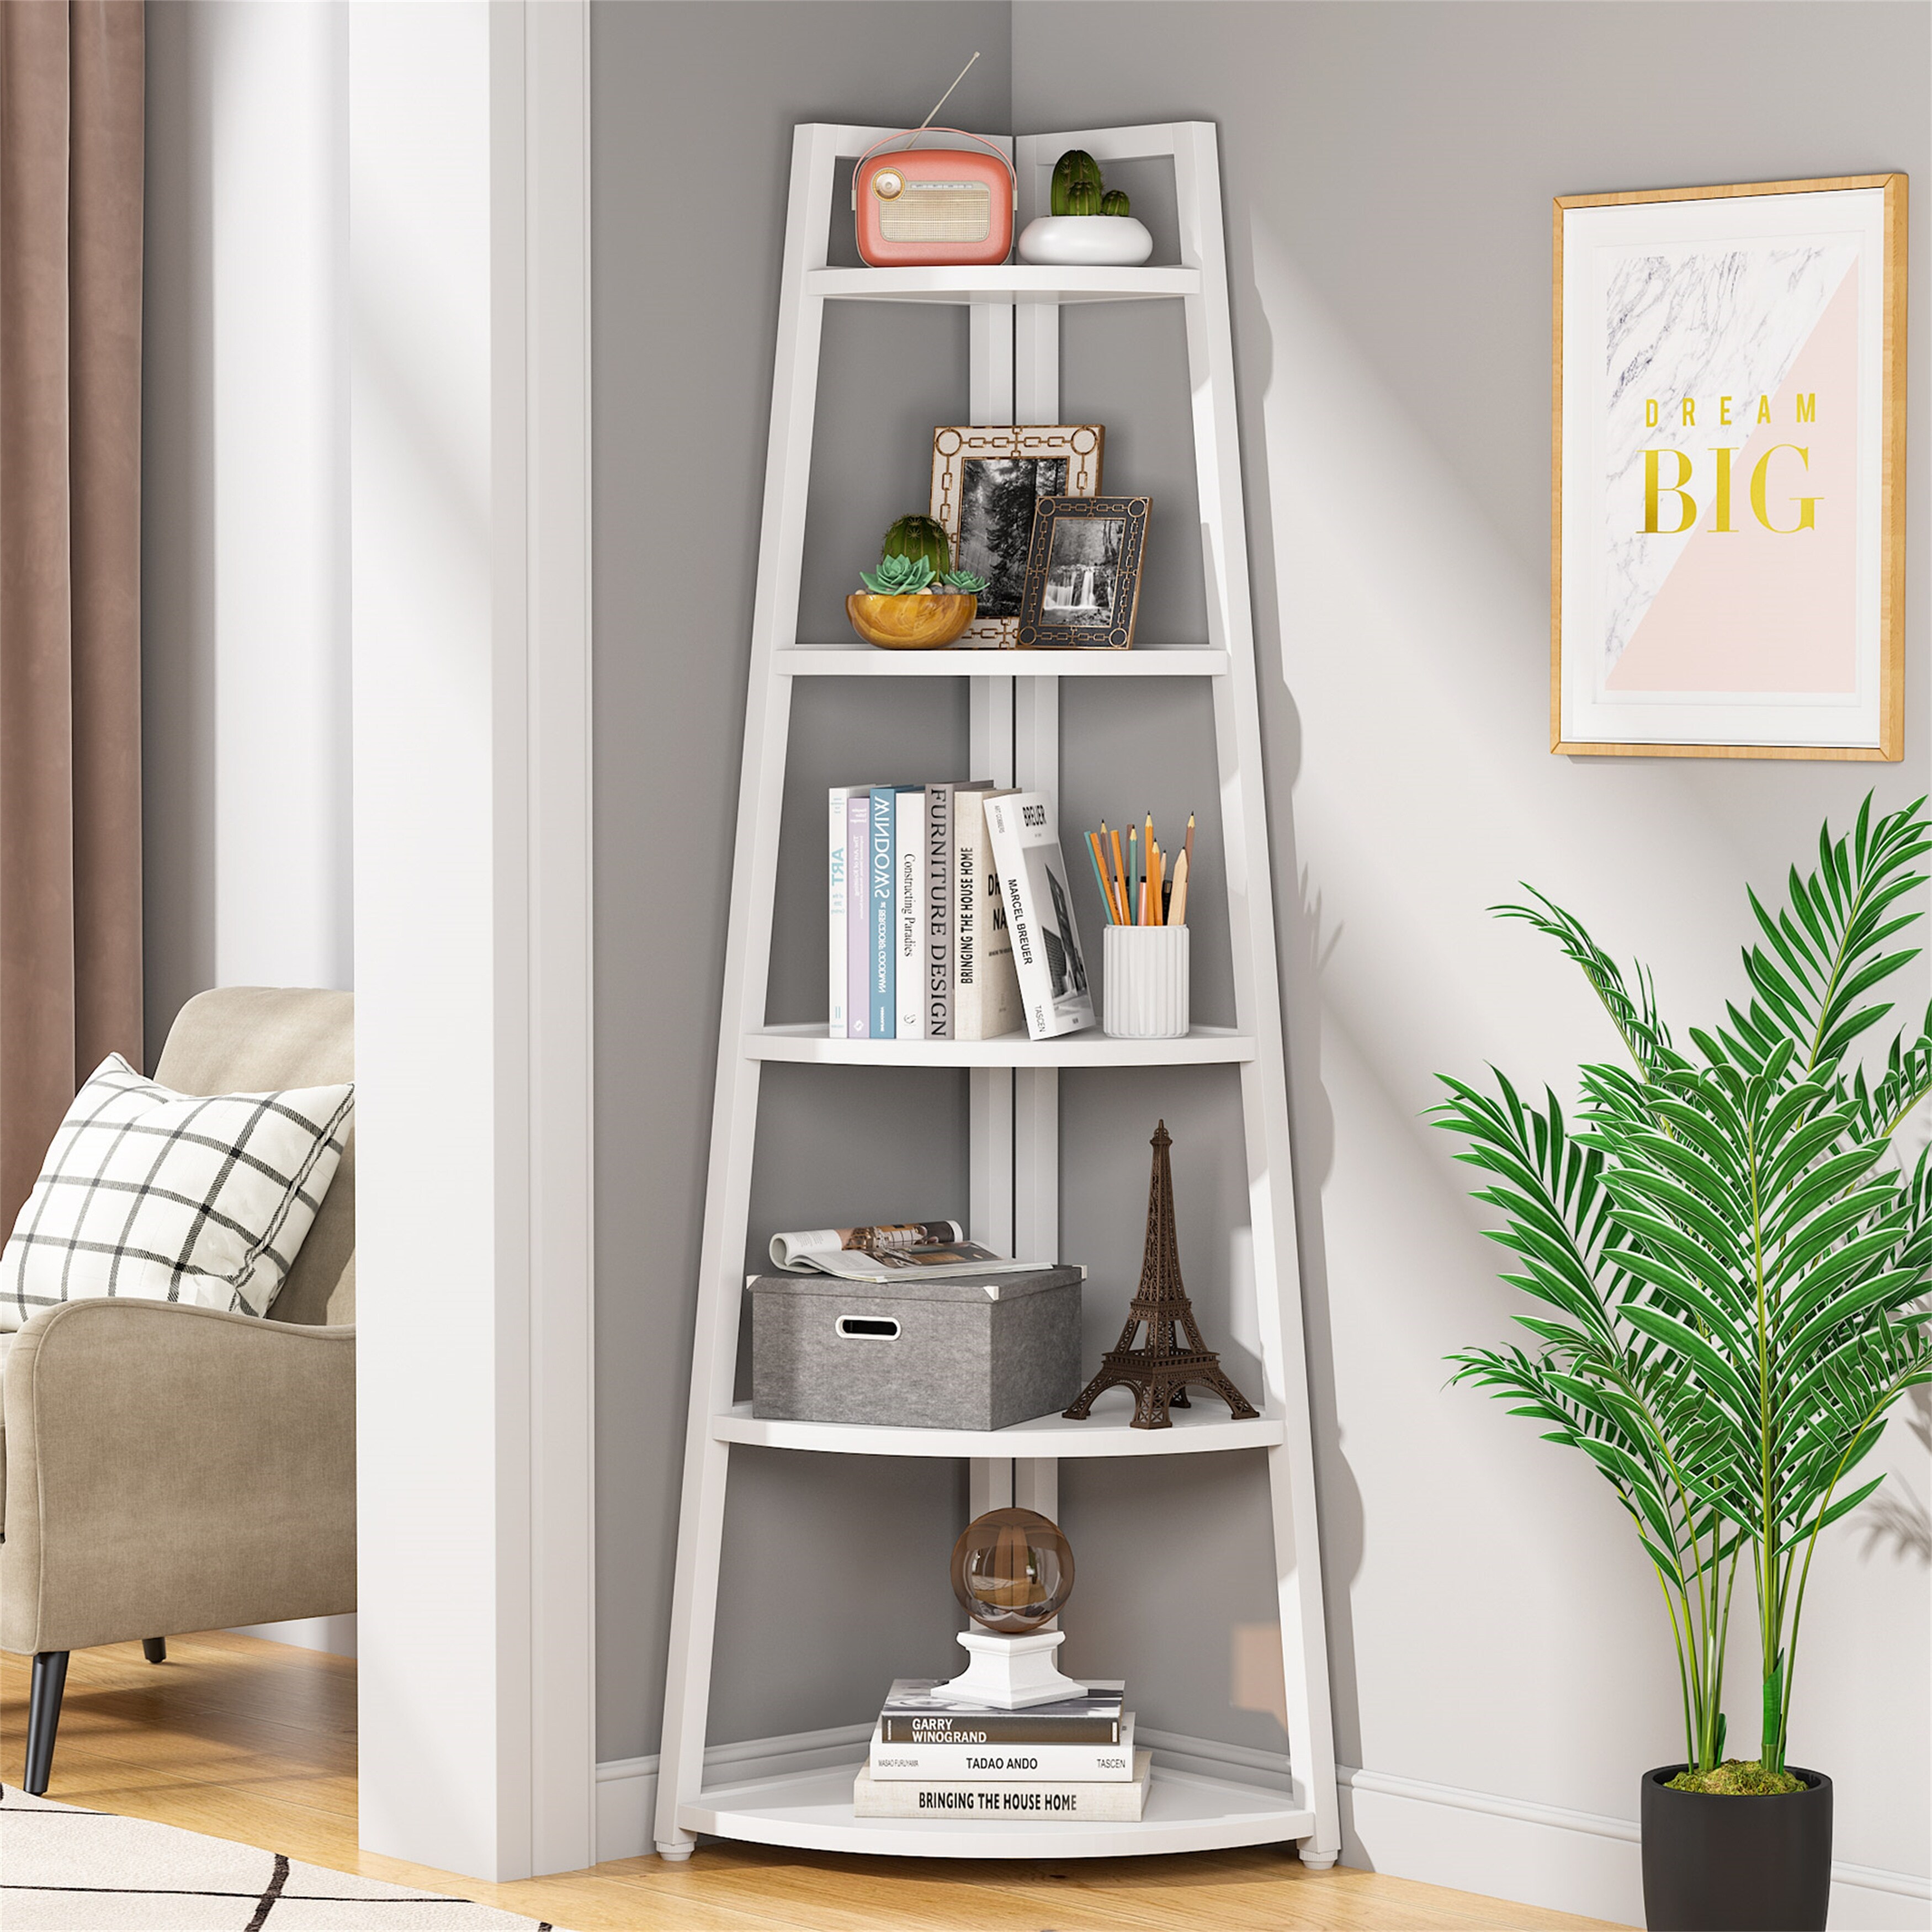 https://ak1.ostkcdn.com/images/products/is/images/direct/afdc020701f37a96eec9640630bd7ab1f95d8d19/5-tier-Bathroom-Corner-Shelf-Storage-Tower-Cabinet.jpg